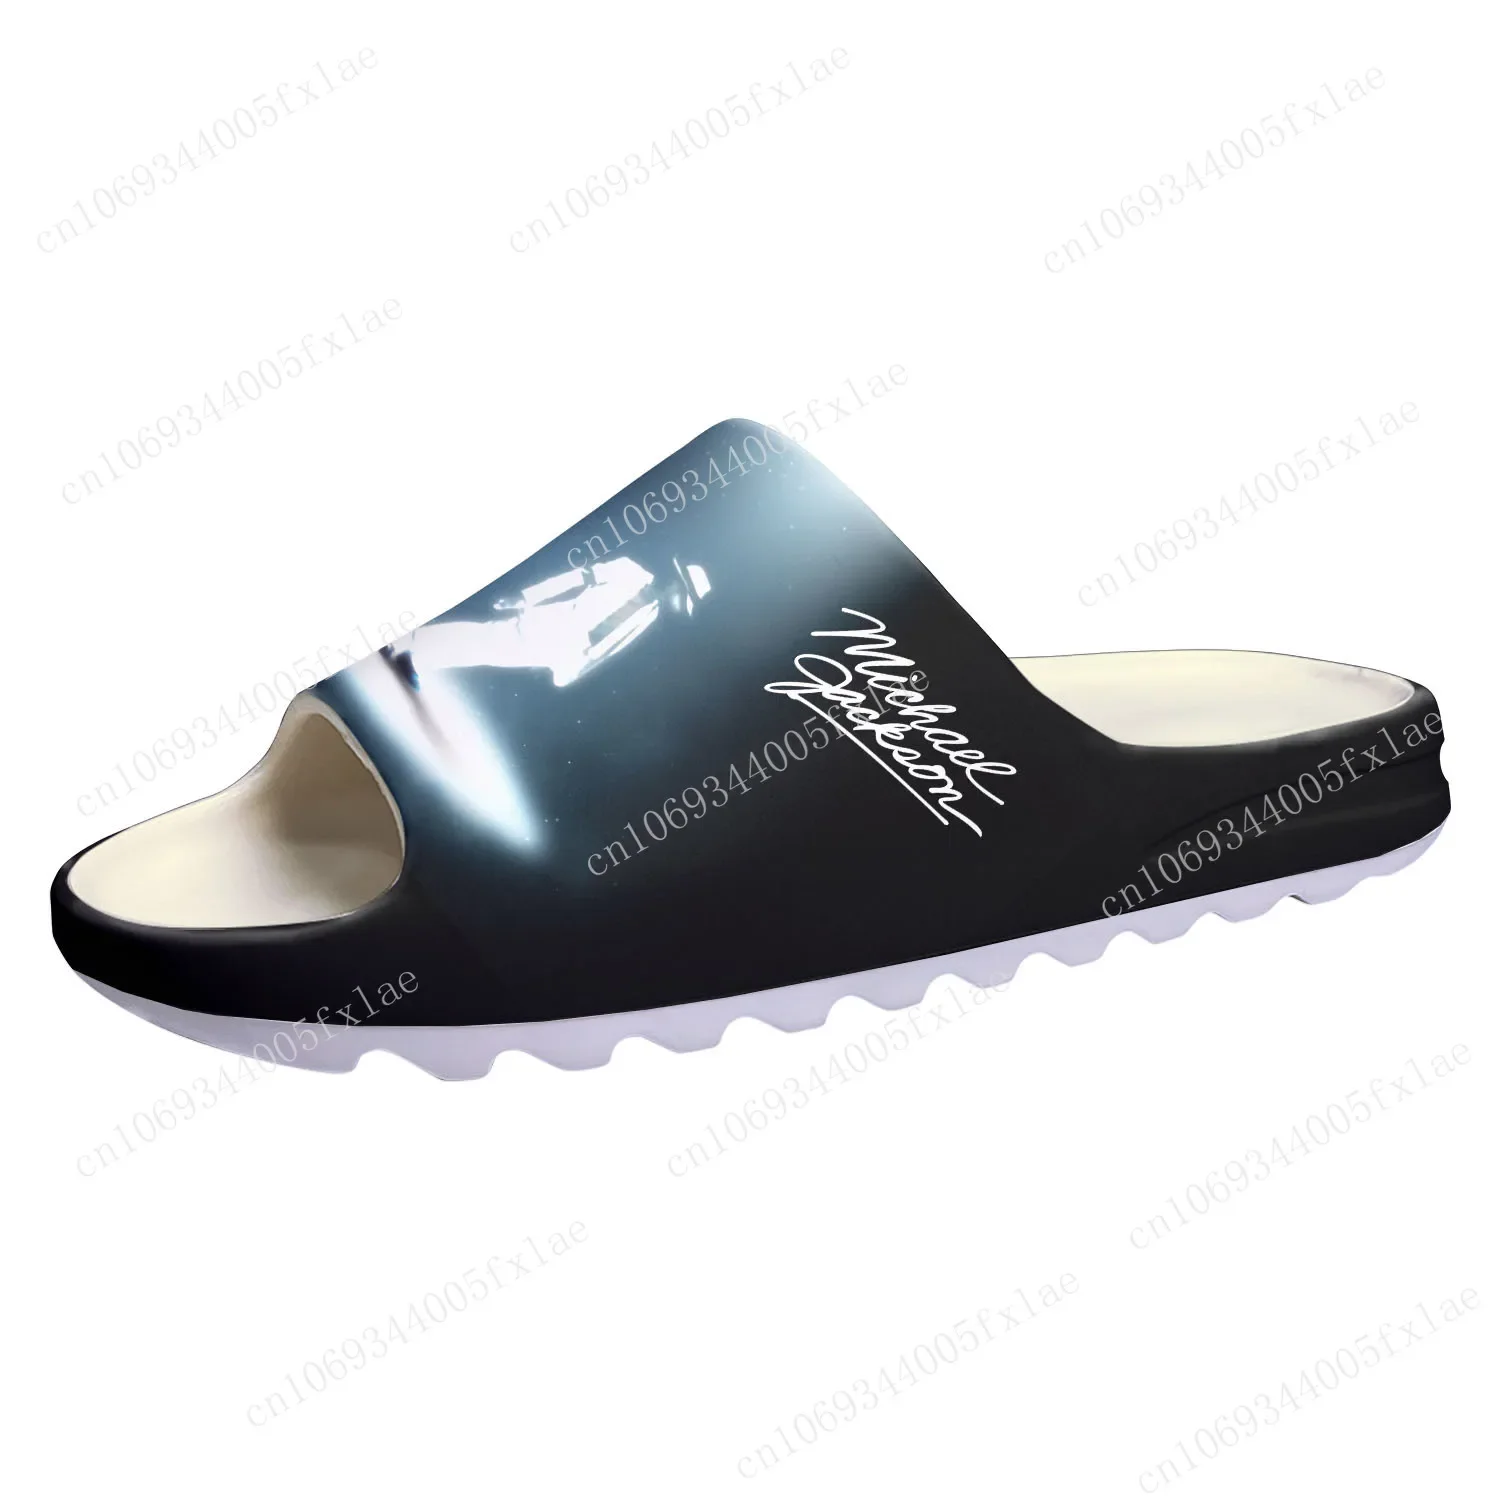 

Michael Jackson Soft Sole Sllipers Home Clogs Step on Water Shoes Mens Womens Teenager Bathroom Beach Customize on Shit Sandals